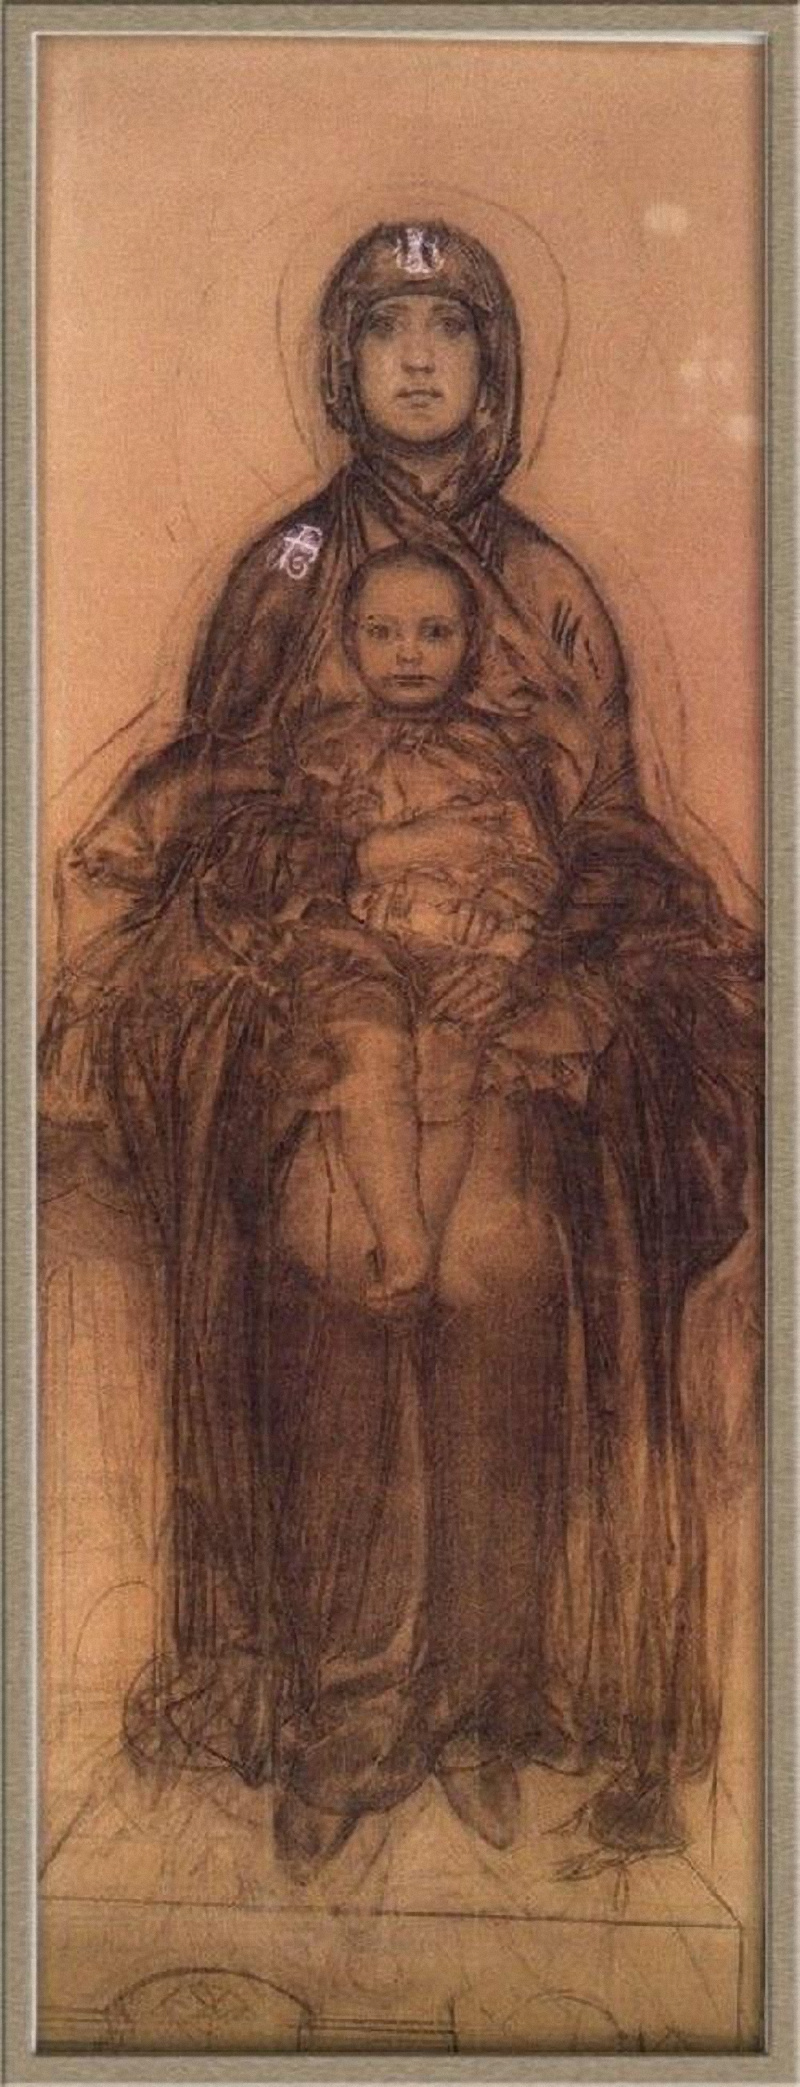 Mikhail Vrubel. The virgin with the Baby (sketch for the iconostasis of St. Cyril's Church in Kiev)